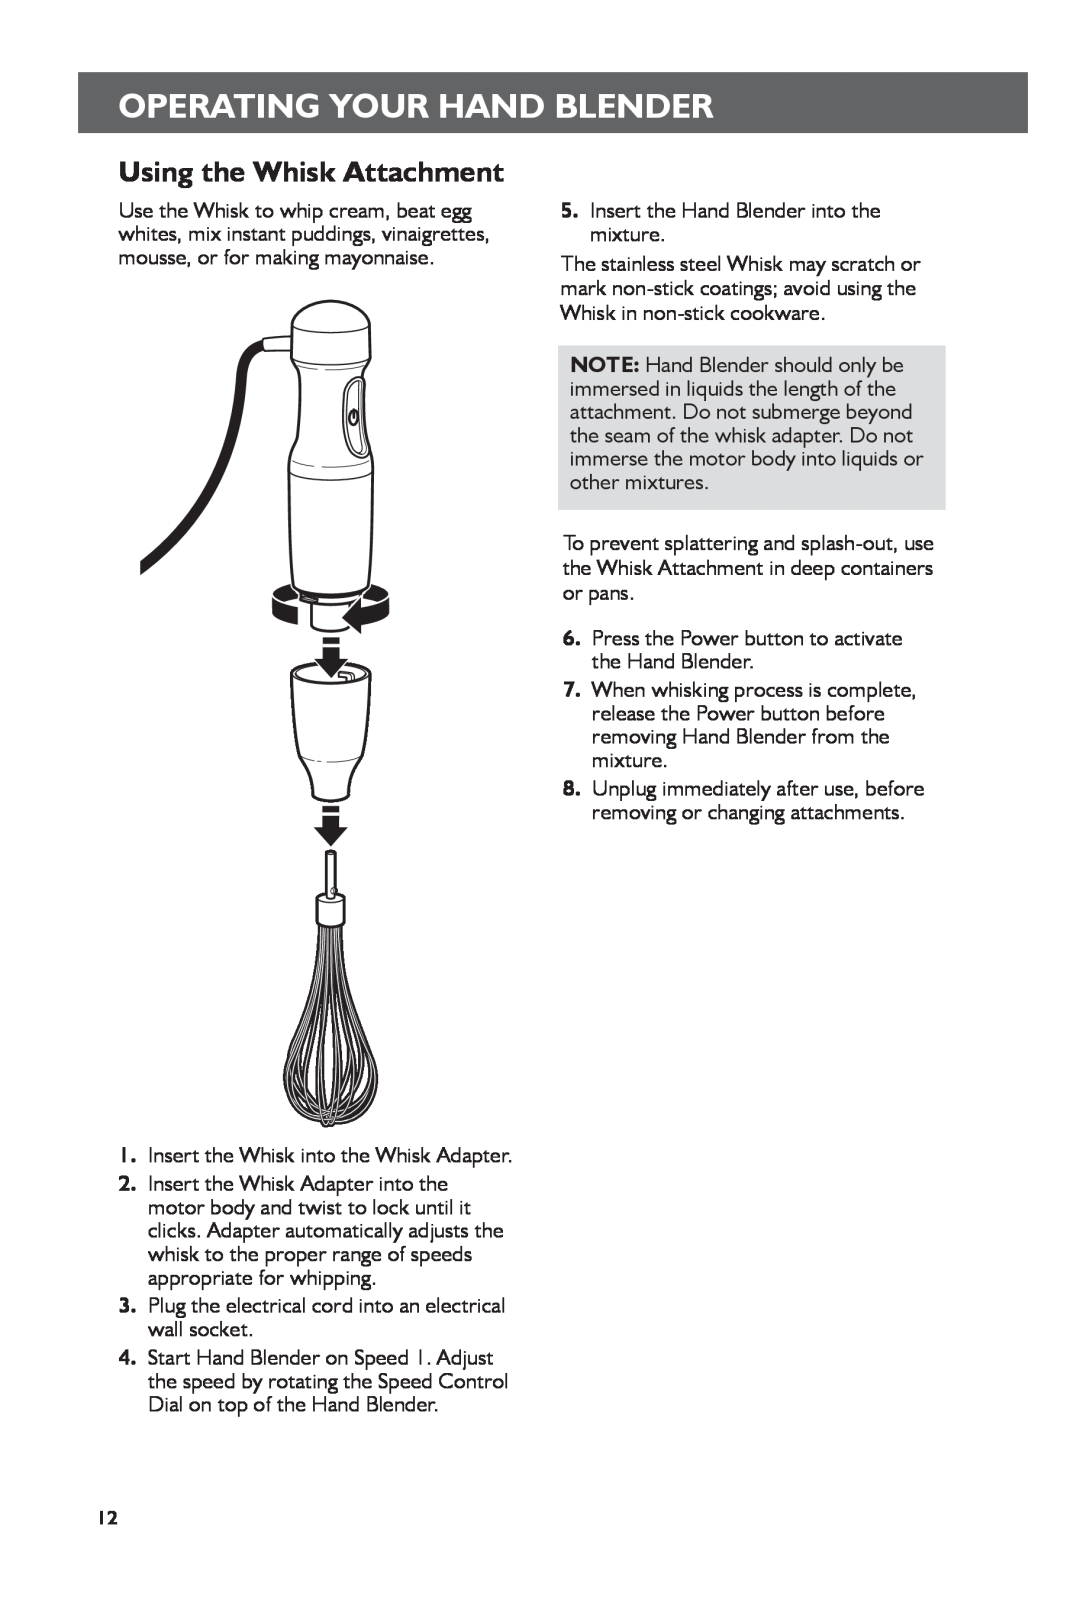 KitchenAid 5KHB2571 manual Using the Whisk Attachment, Operating Your Hand Blender 